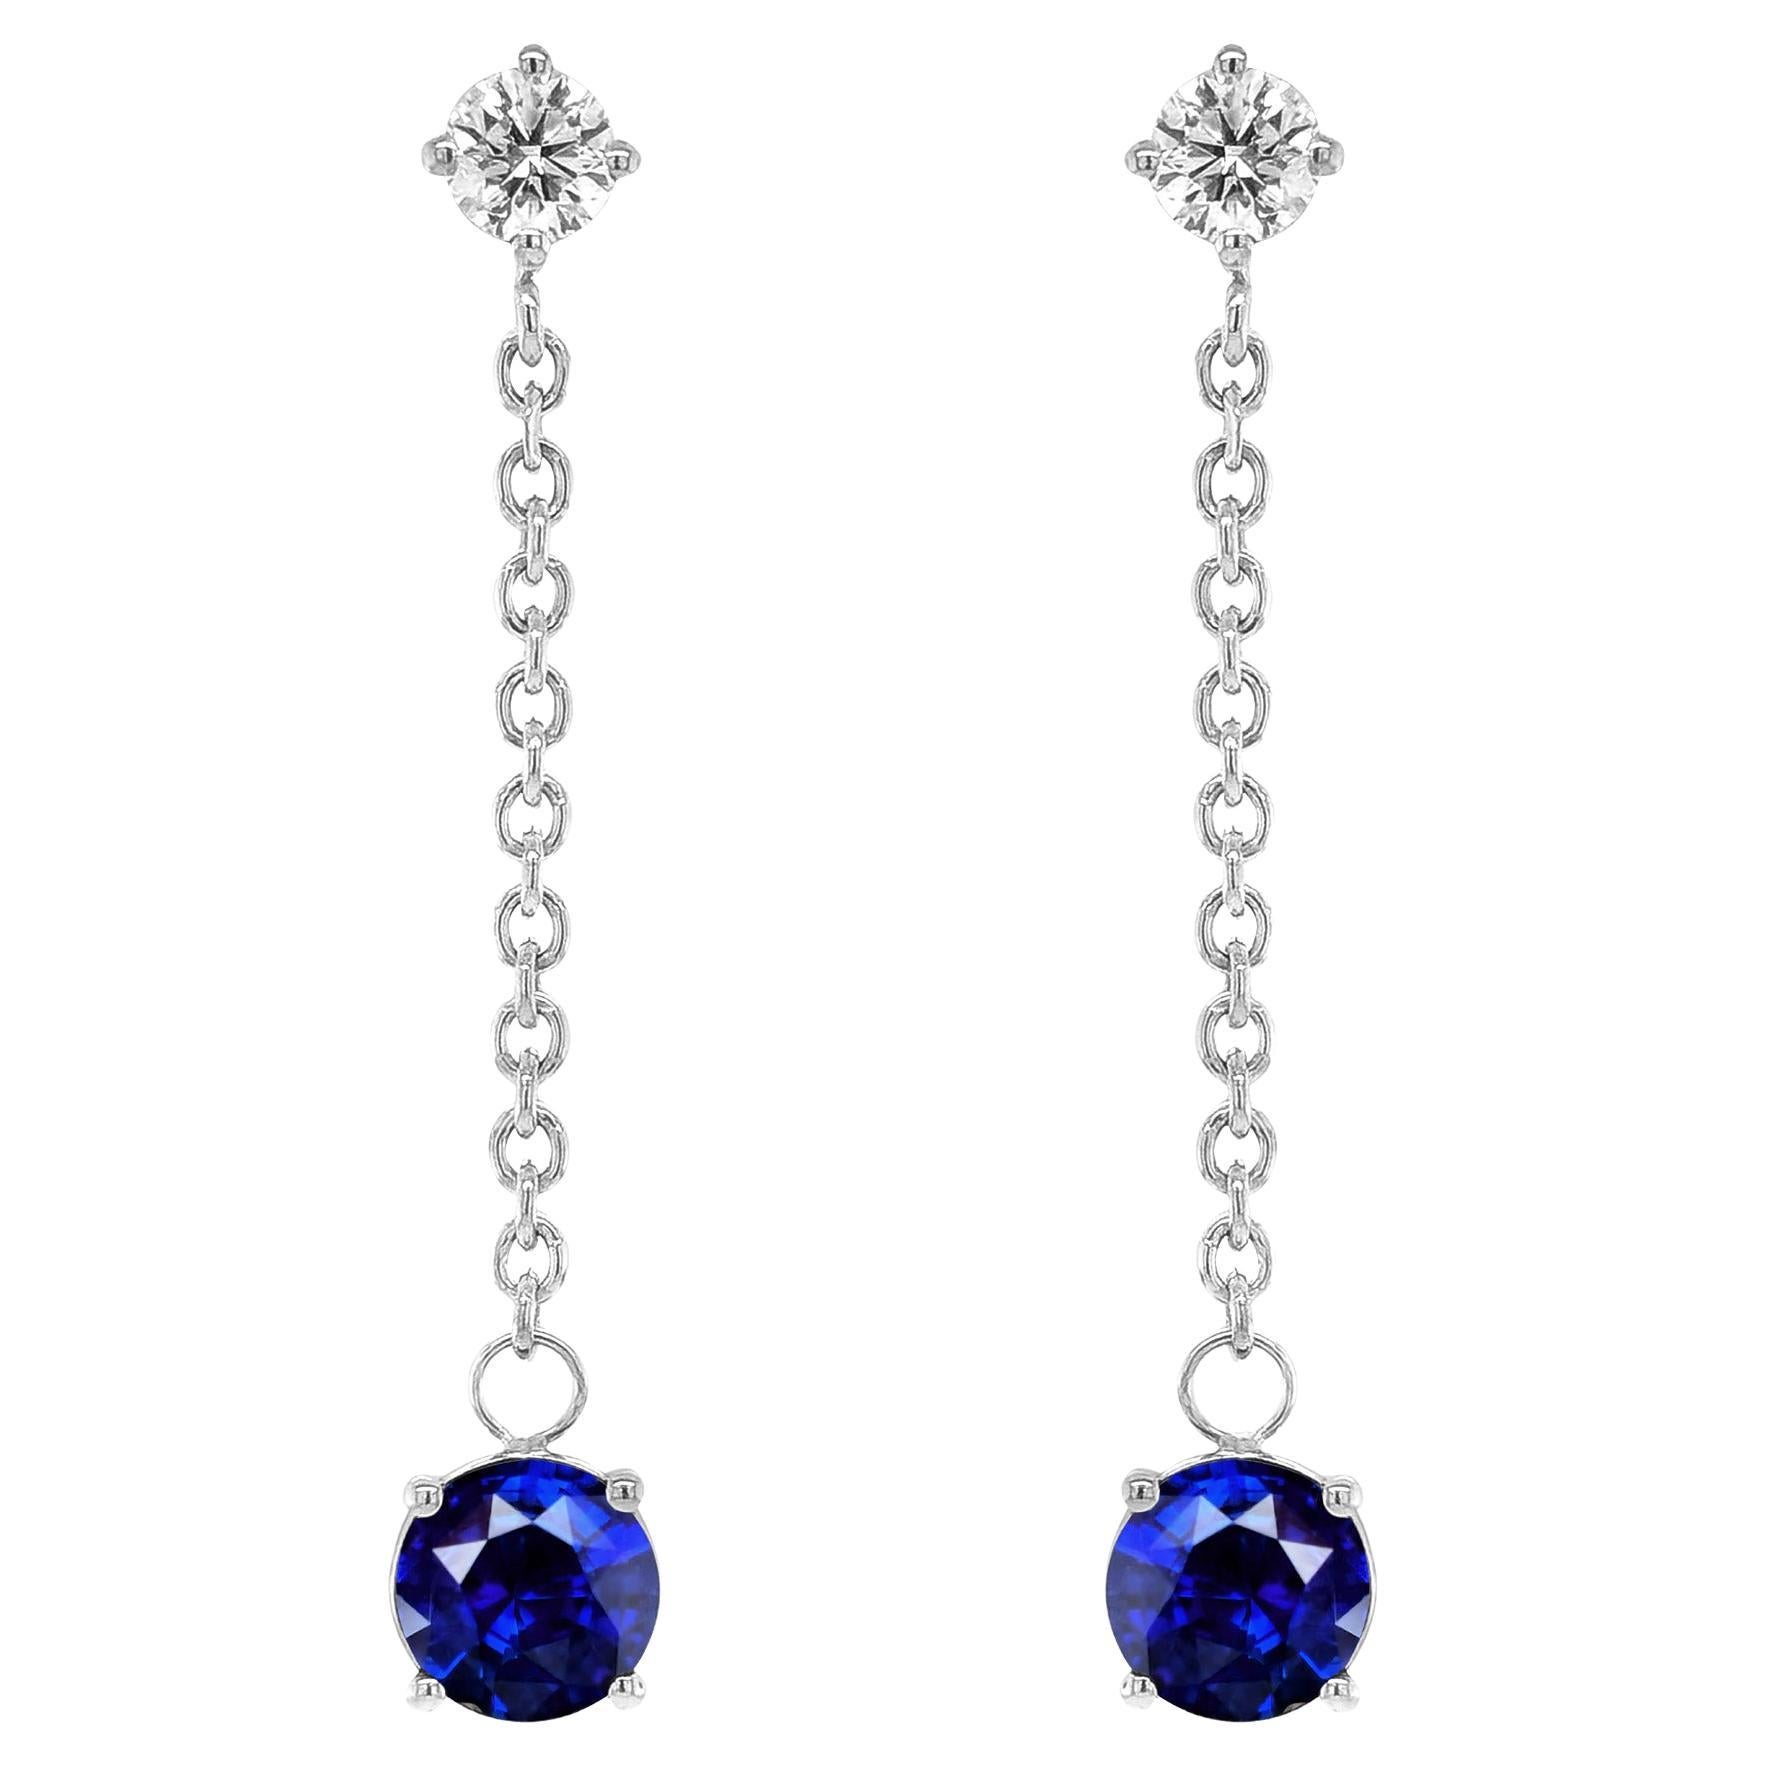 Natural Blue Sapphires 2.02 Carats Earrings with Diamonds For Sale